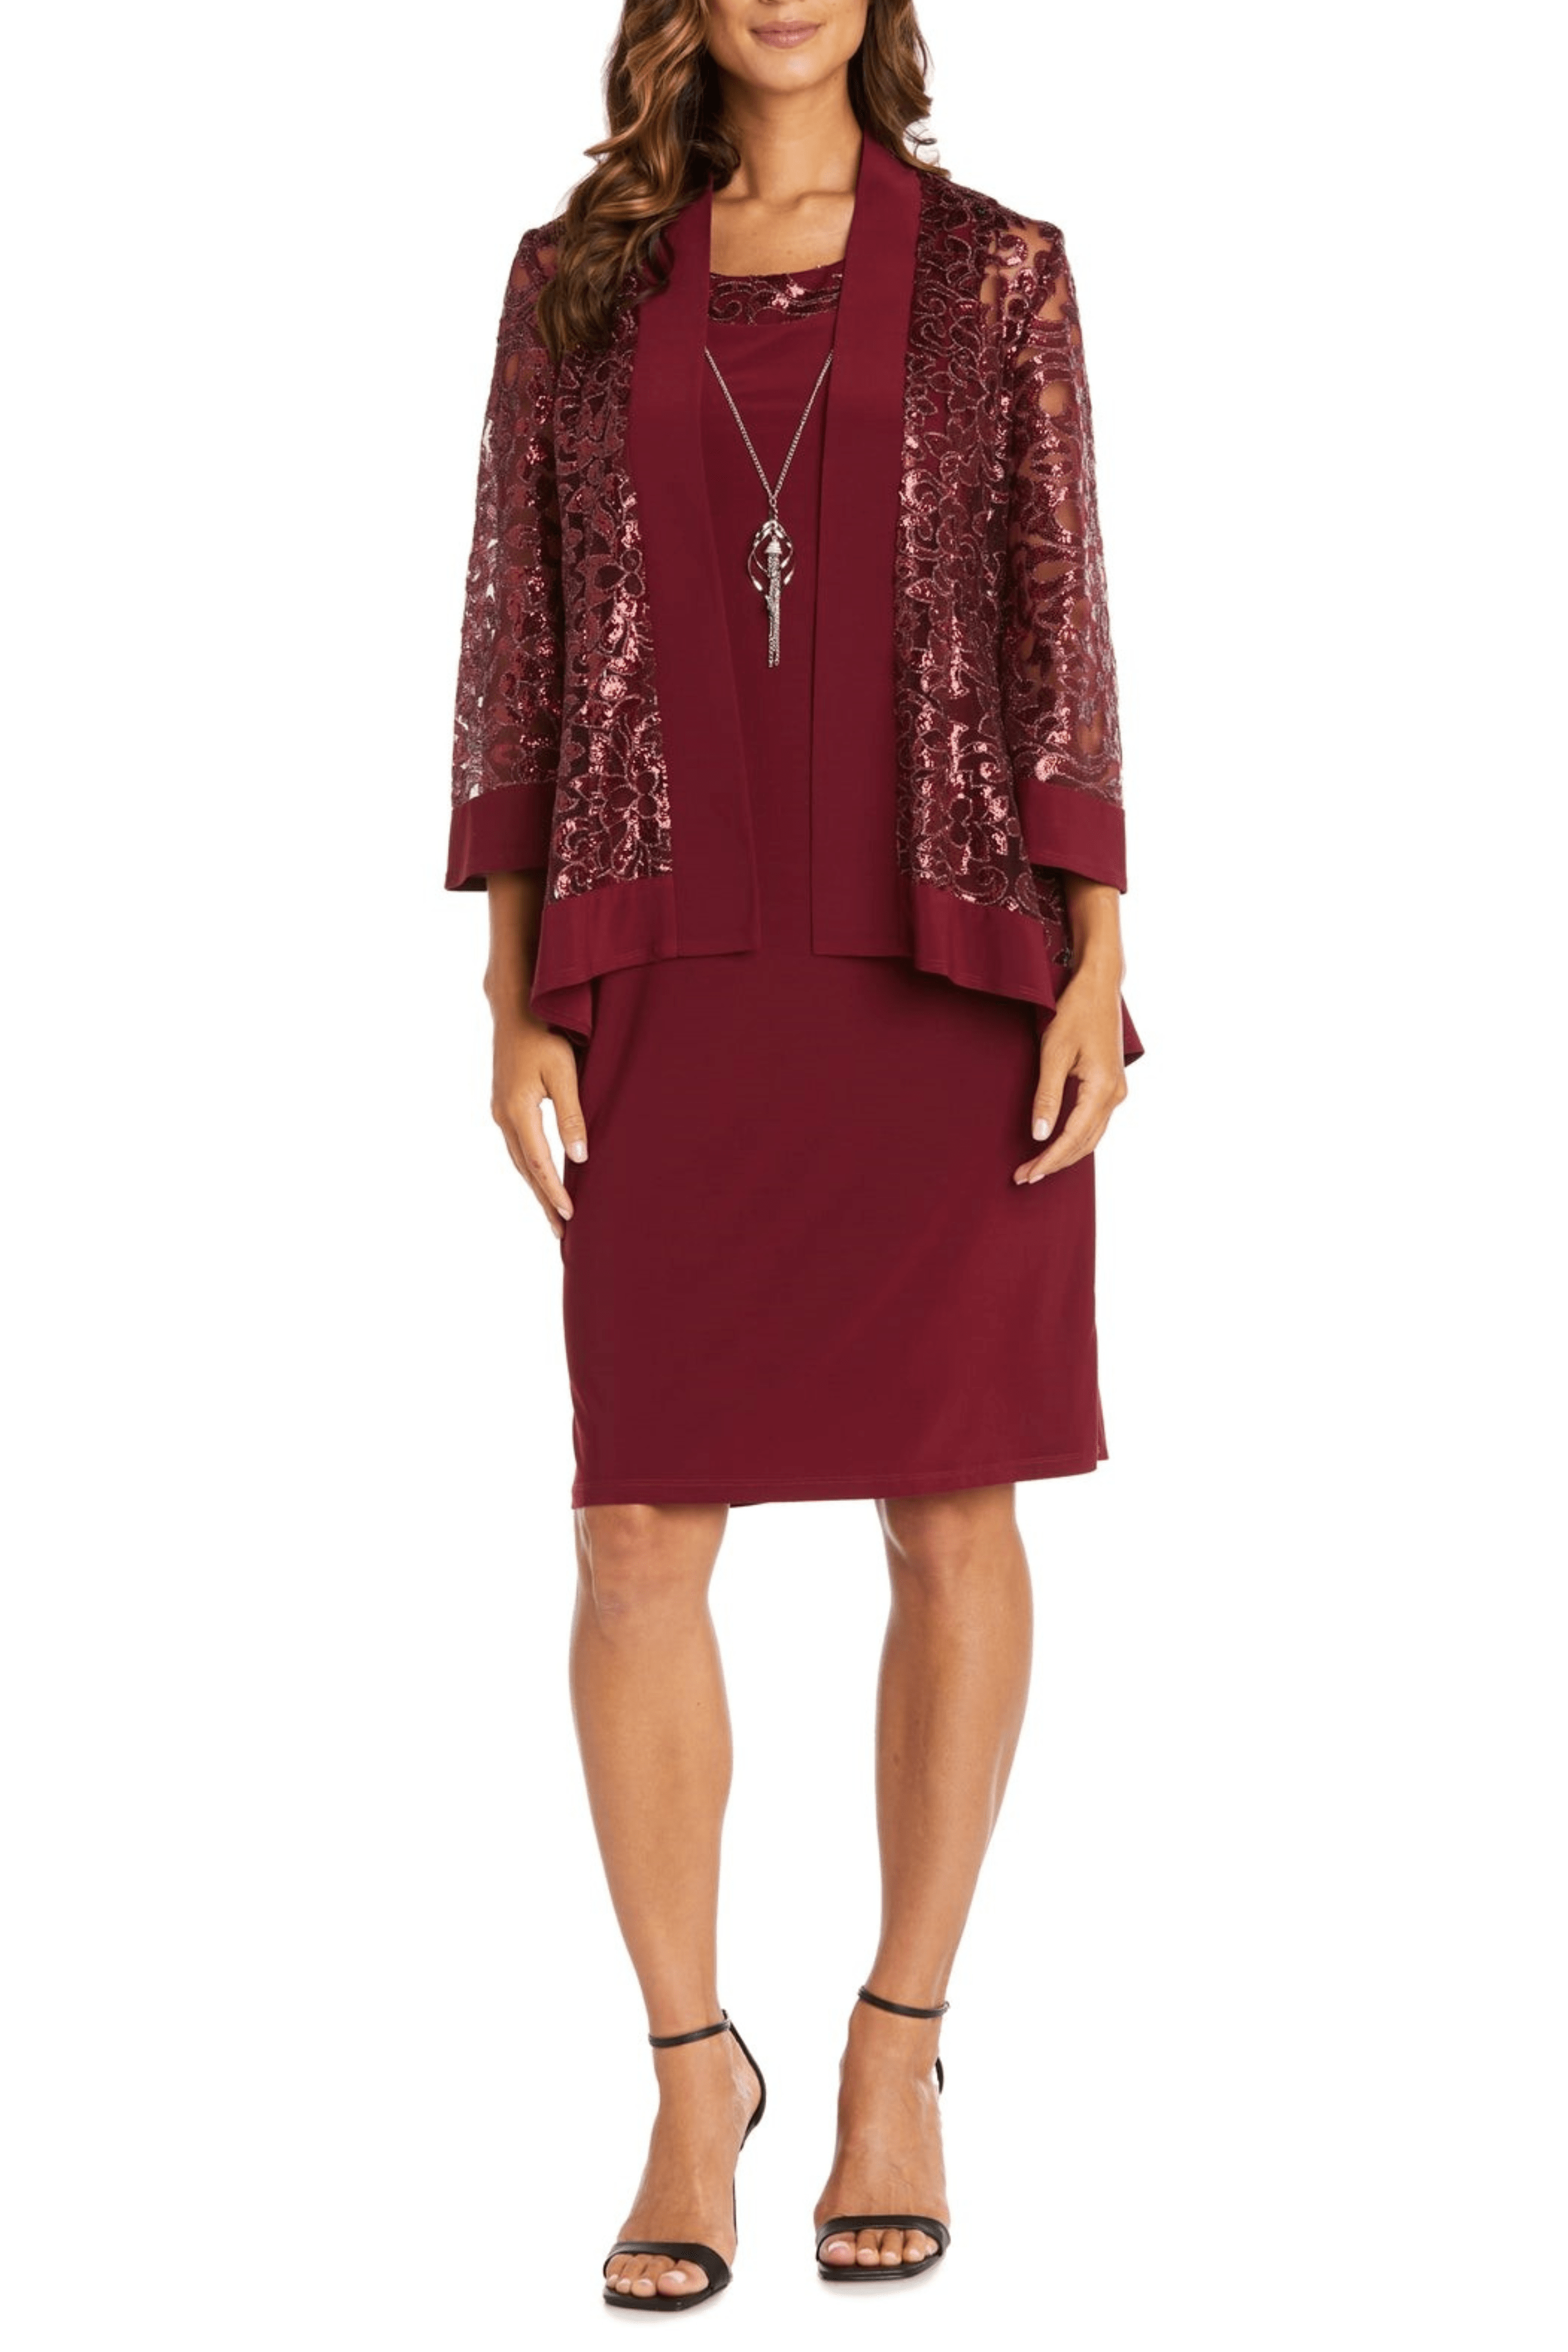 Image of R&M Richards 7387 - Scoop Neck Two-Piece Cocktail Dress